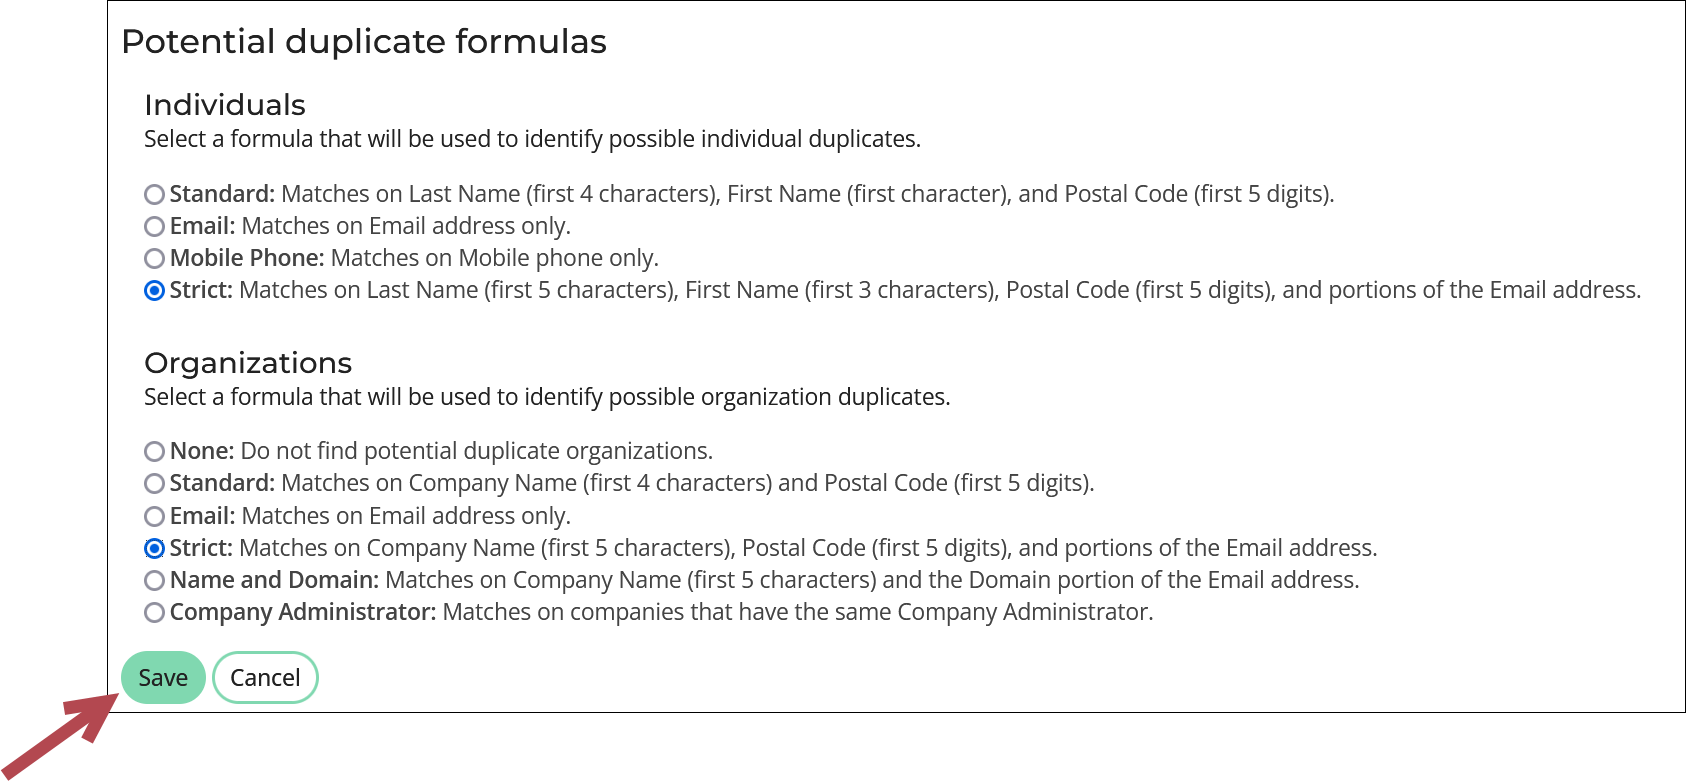 Potential duplicate formuals overview with arrow pointing to save button